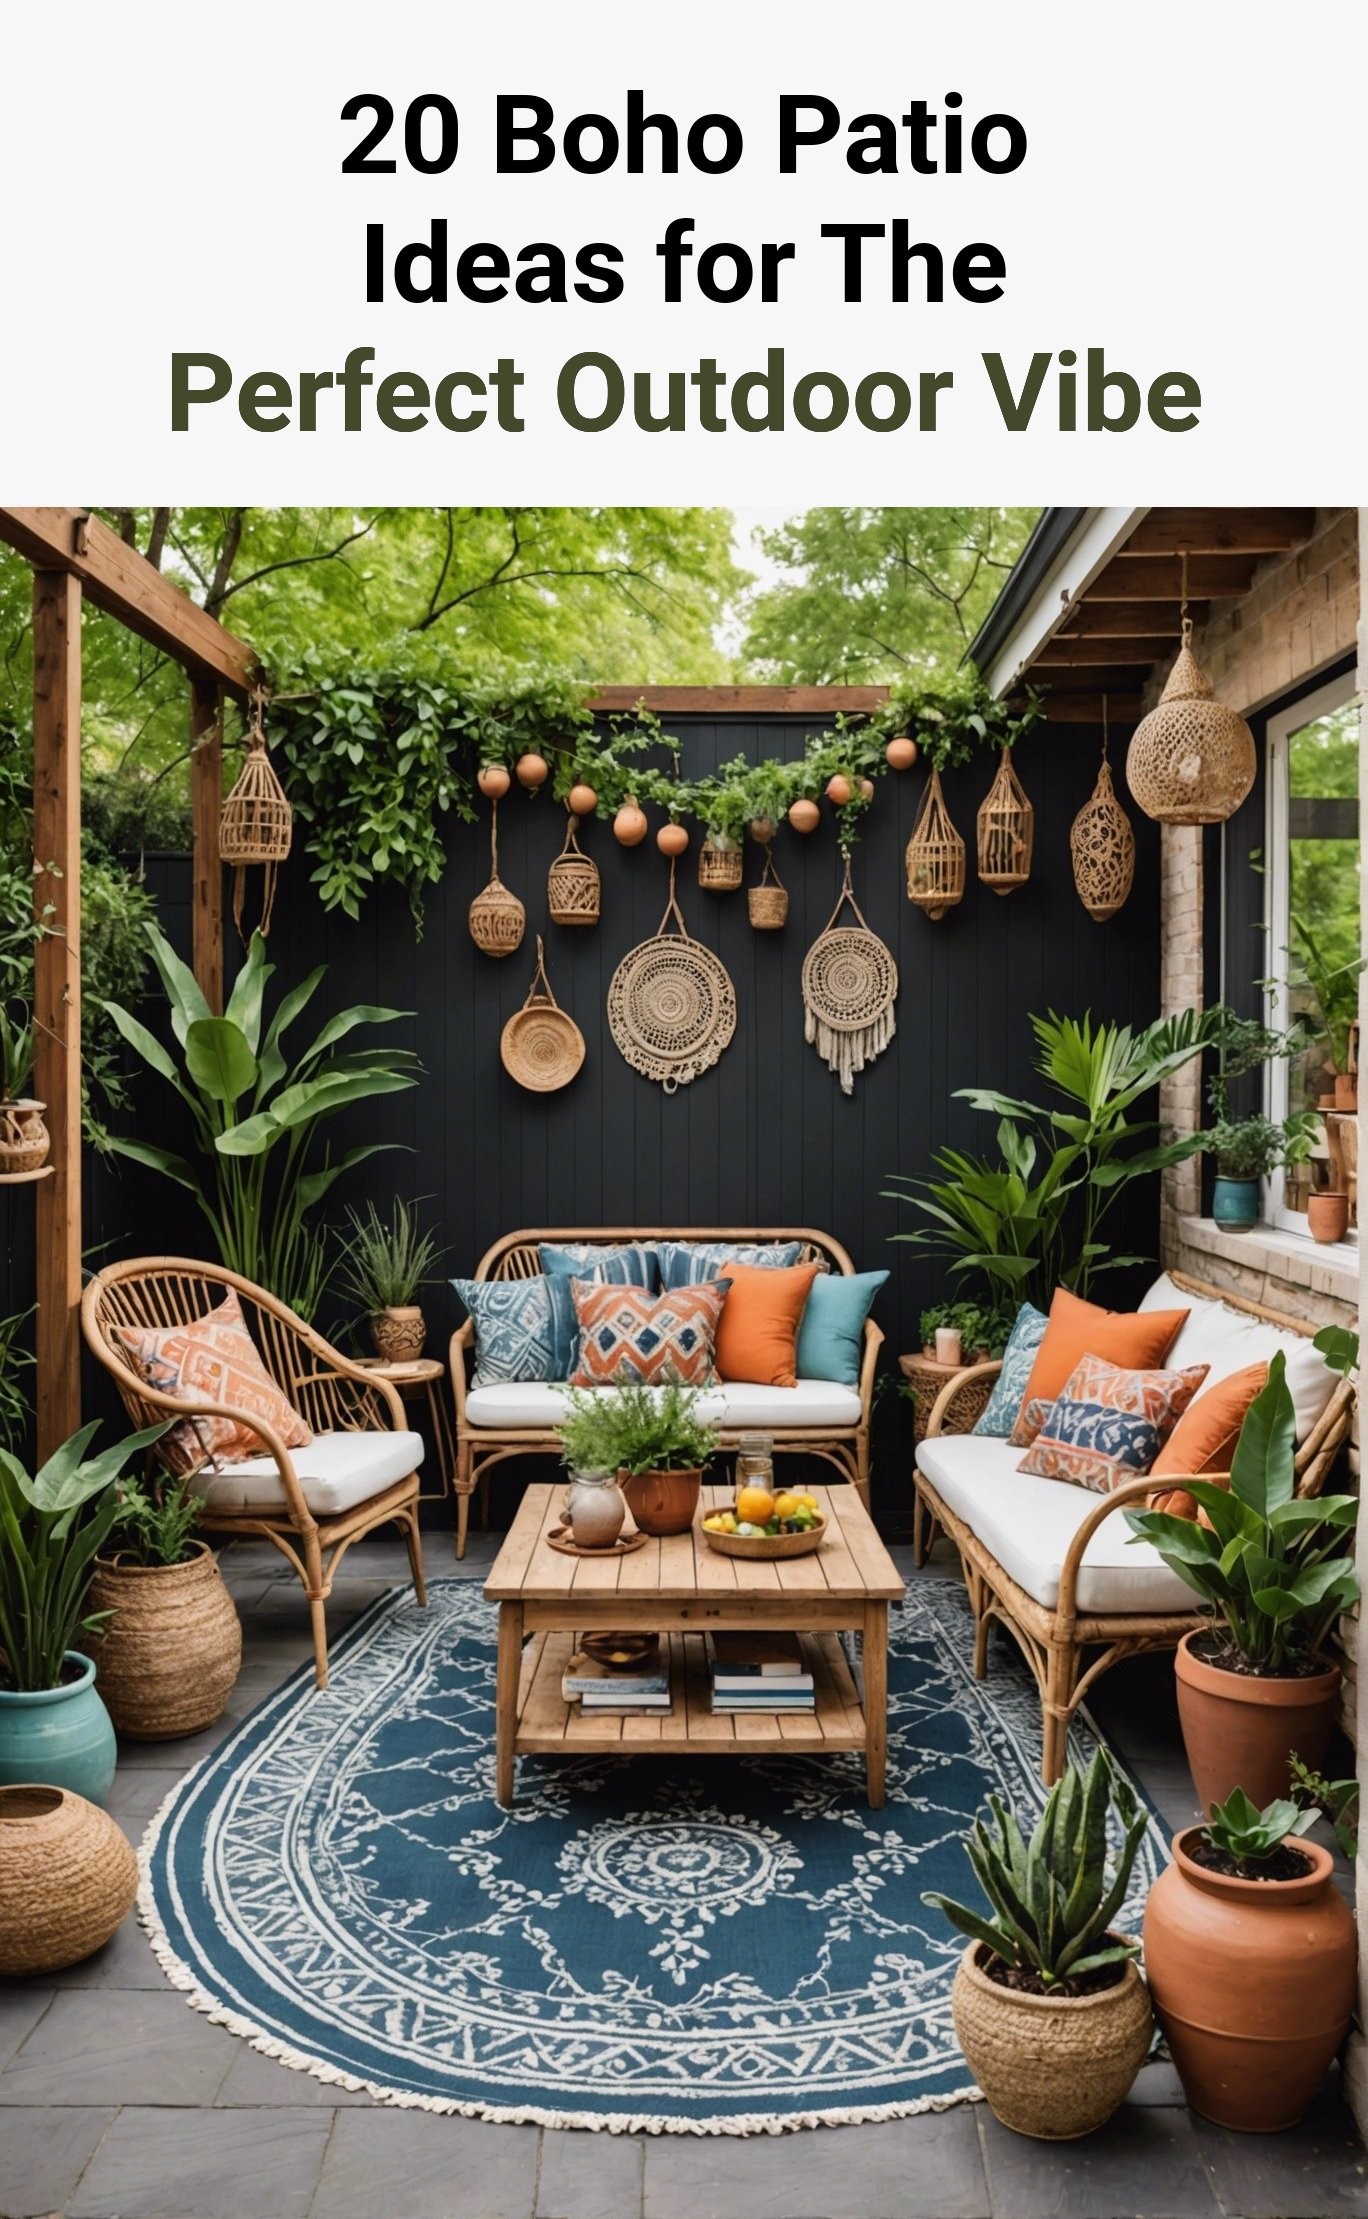 20 Boho Patio Ideas for The Perfect Outdoor Vibe